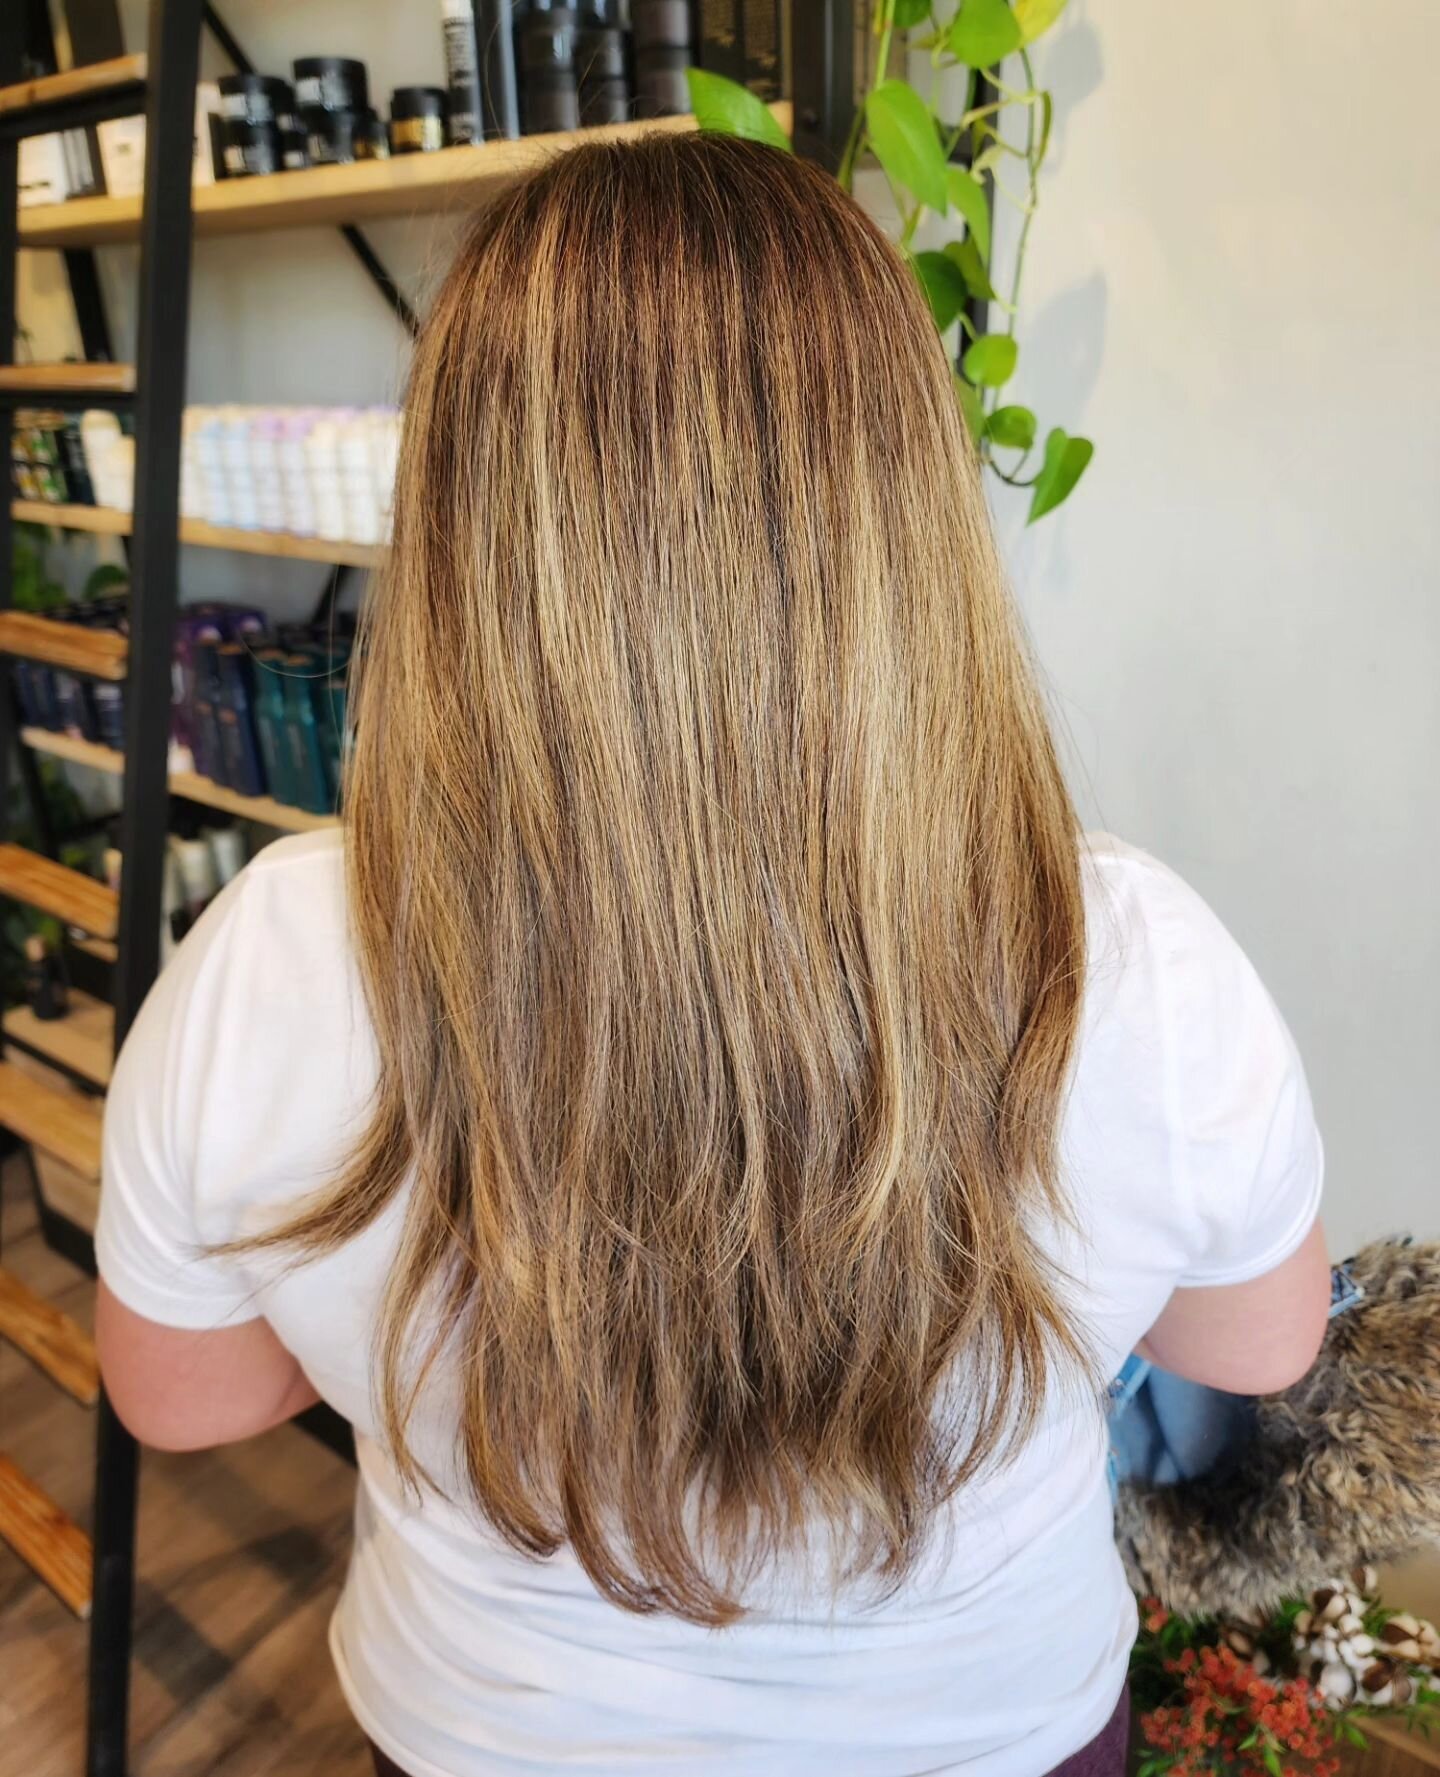 Corrective color! Scroll for the before pics of sweet Jackie's hair - bleeding foils, hard lines and crazy uneven color 🫣 this was our first go at getting her color back on track, and while it's not perfect, it's a heck of a lot more liveable than b